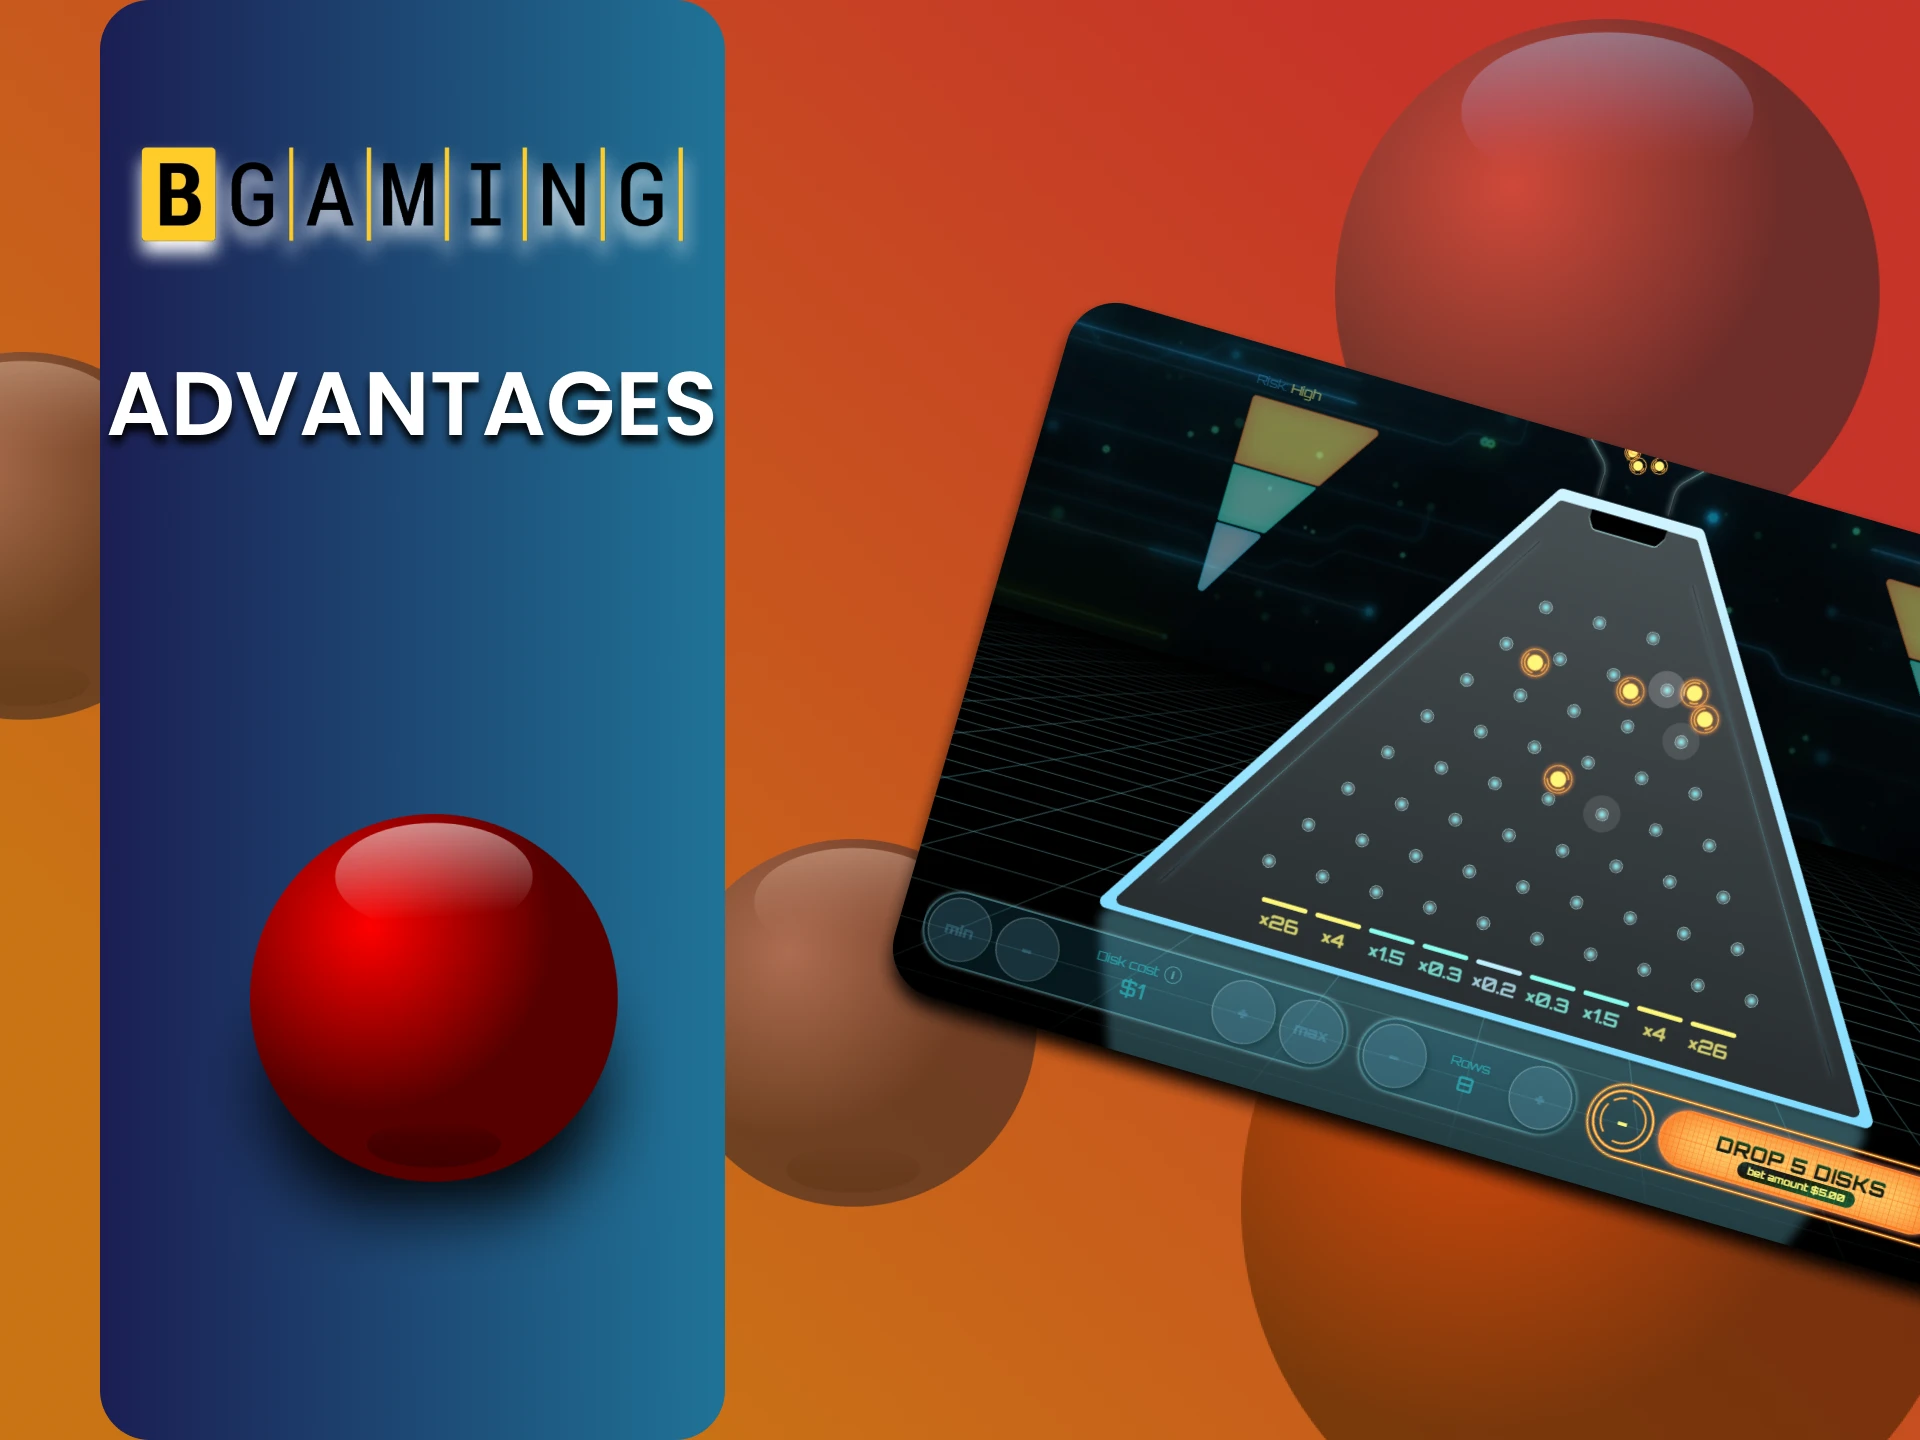 Find out about the advantages of BGaming over other providers.